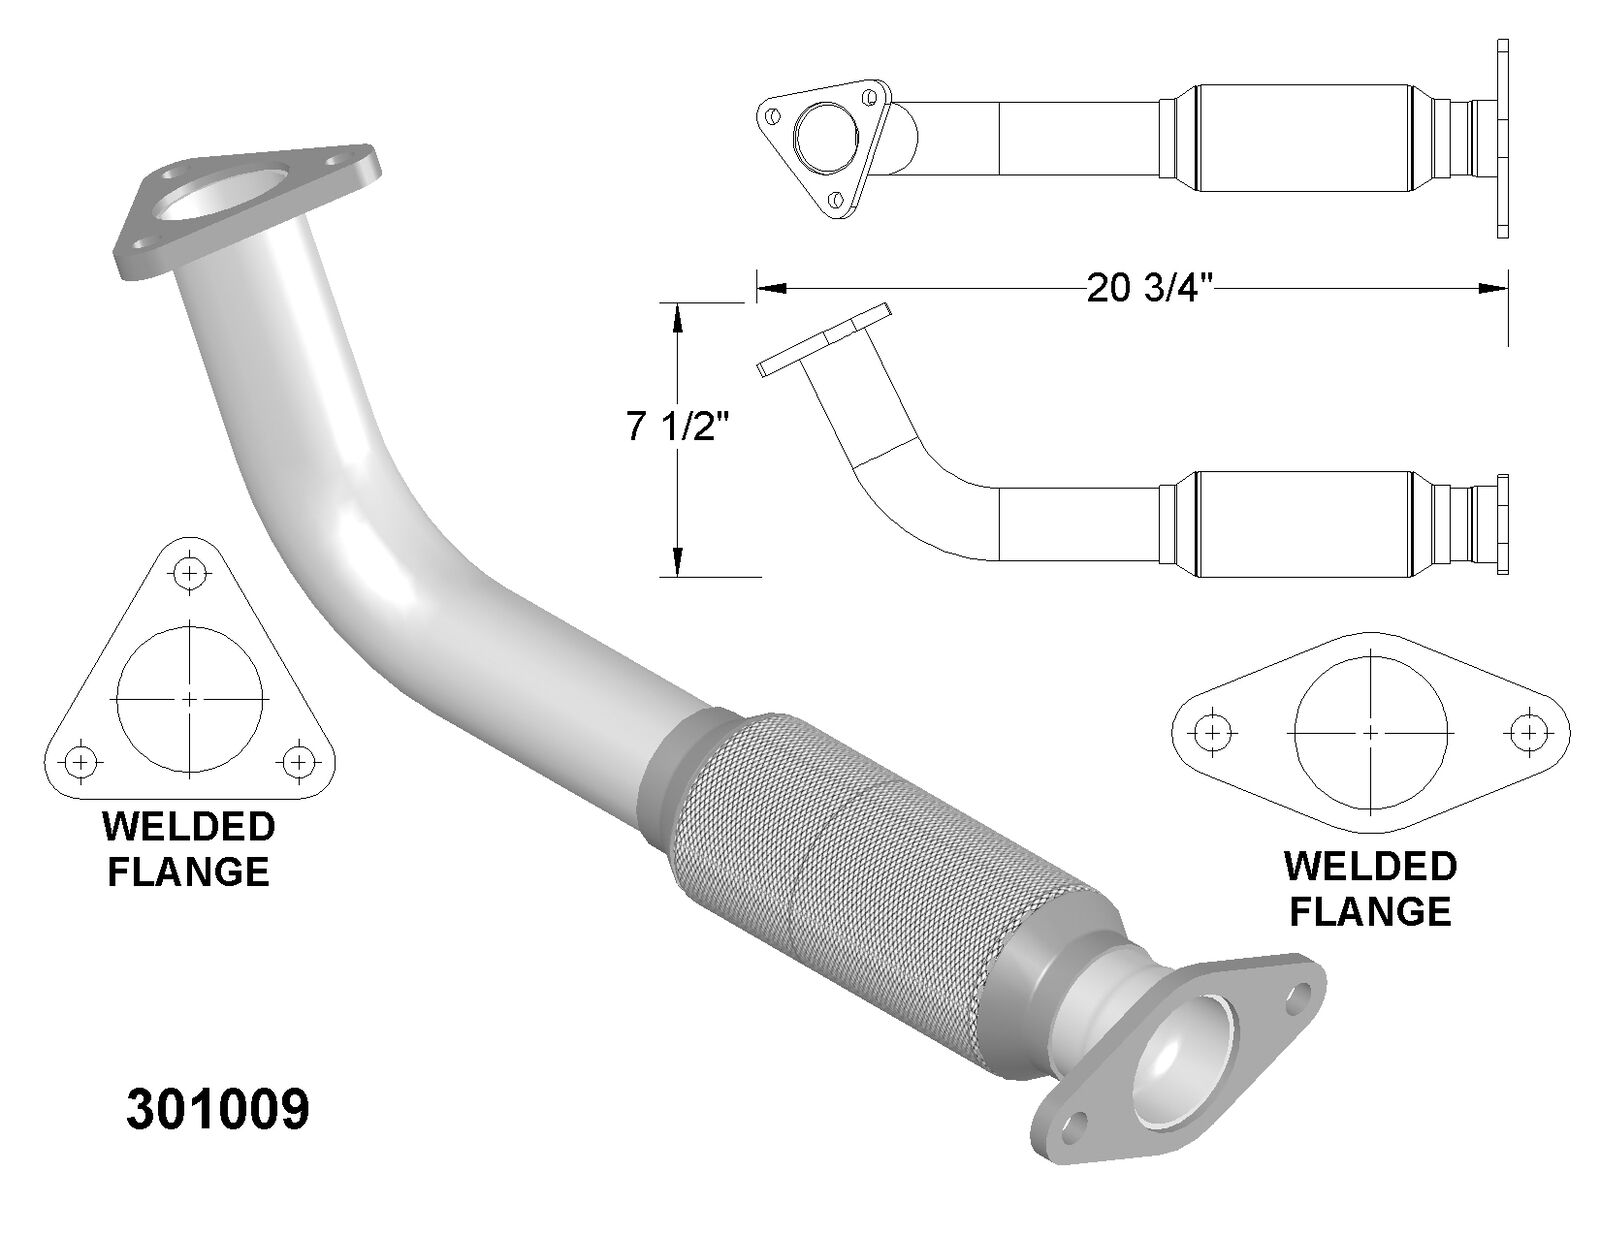 EPA Exhaust Pipe Fits: 1991-1994 Ford Escort 1.8L L4 GAS DOHC